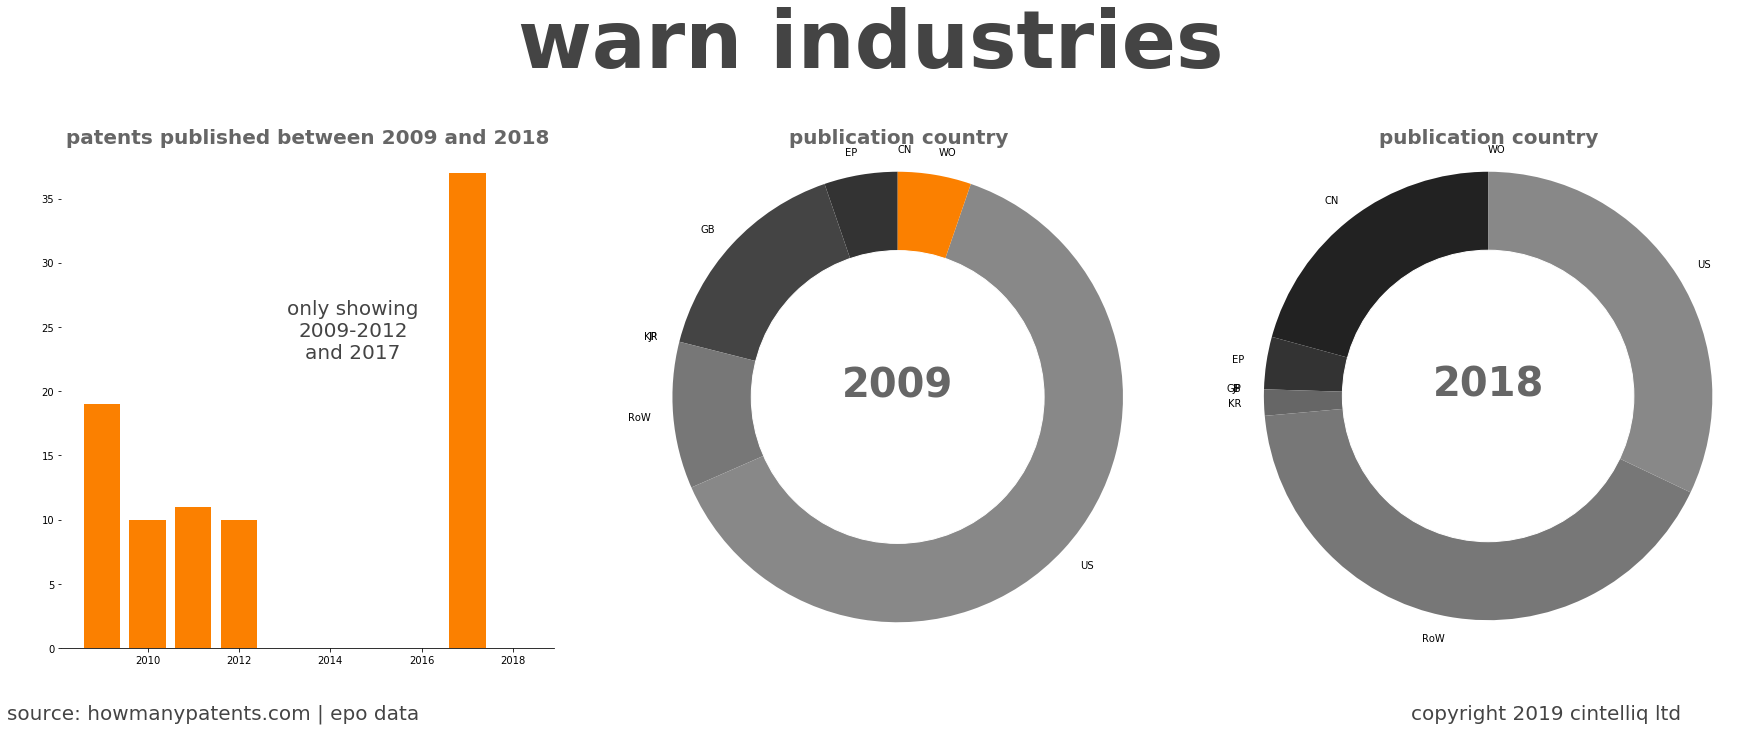 summary of patents for Warn Industries